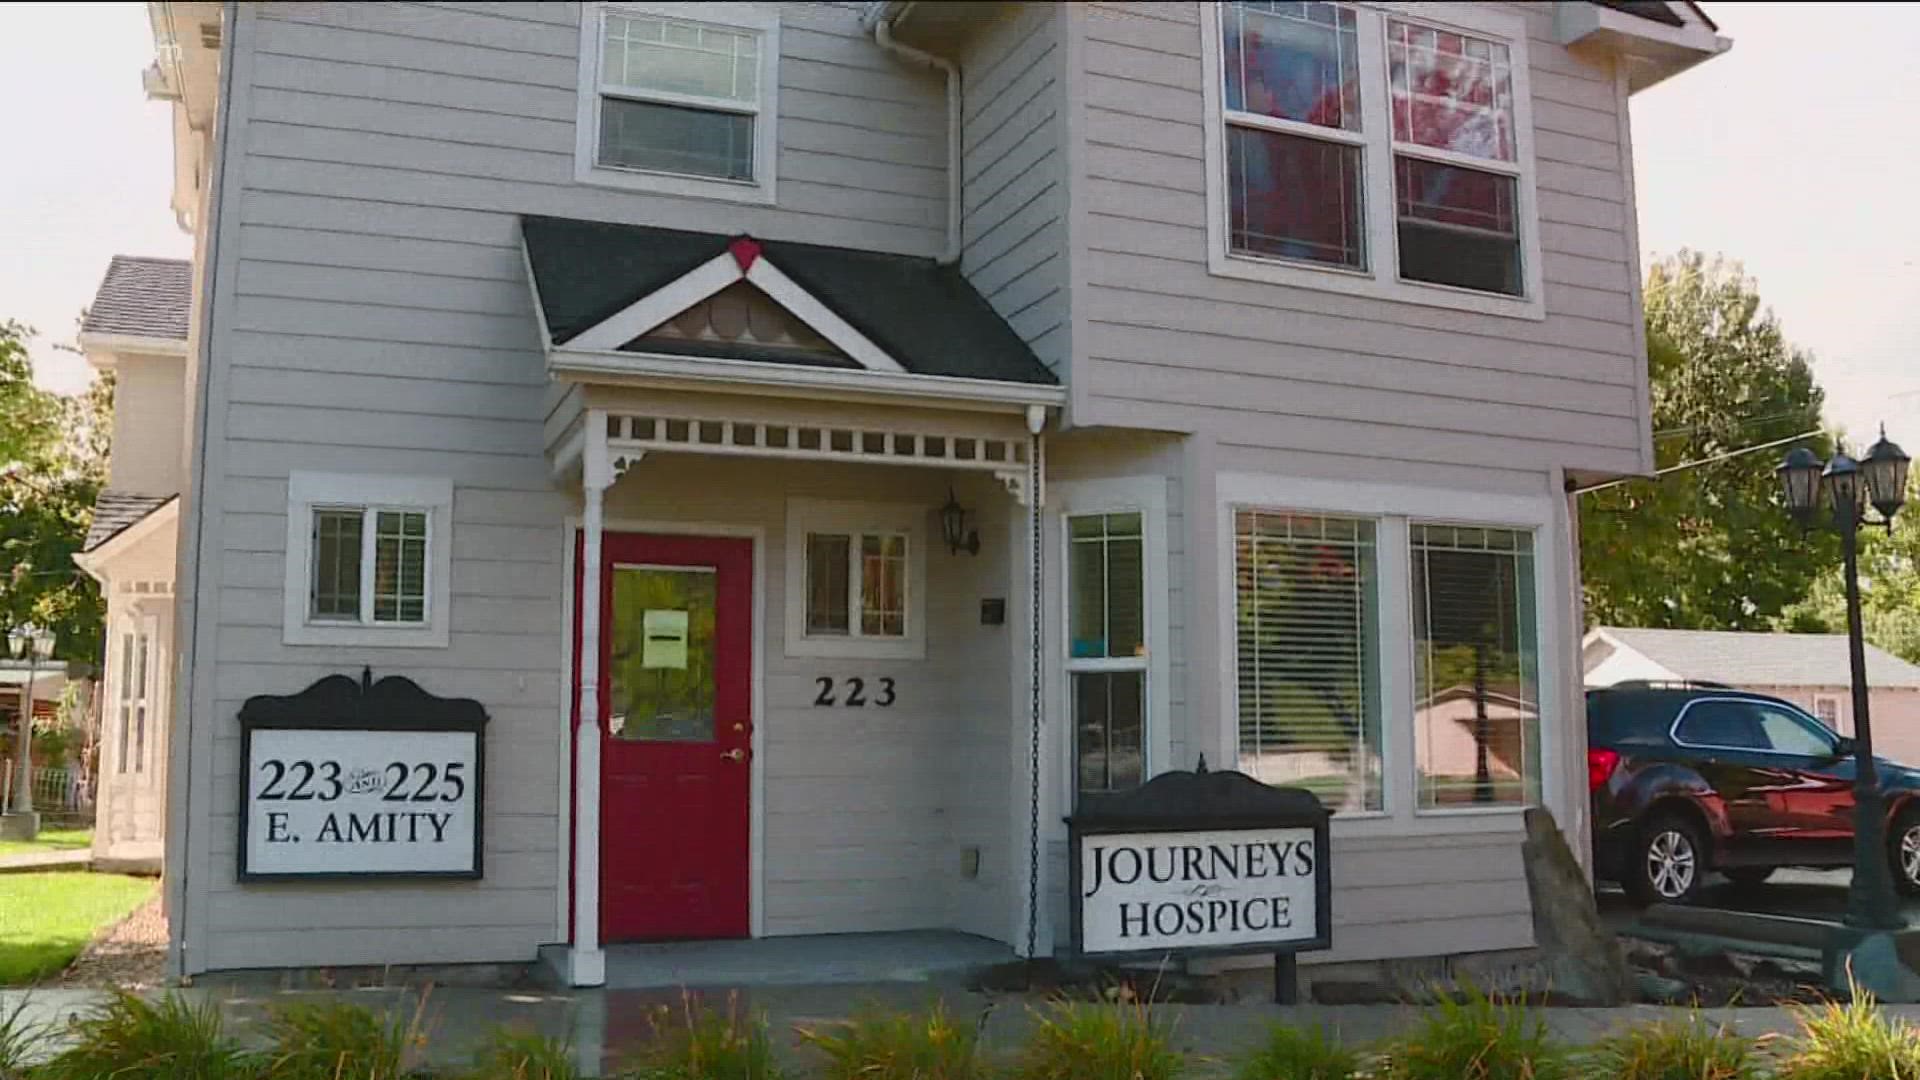 Journeys Hospice says St. Luke's has contacted them three times since Labor Day weekend as the hospital is looking to discharge patients near death.